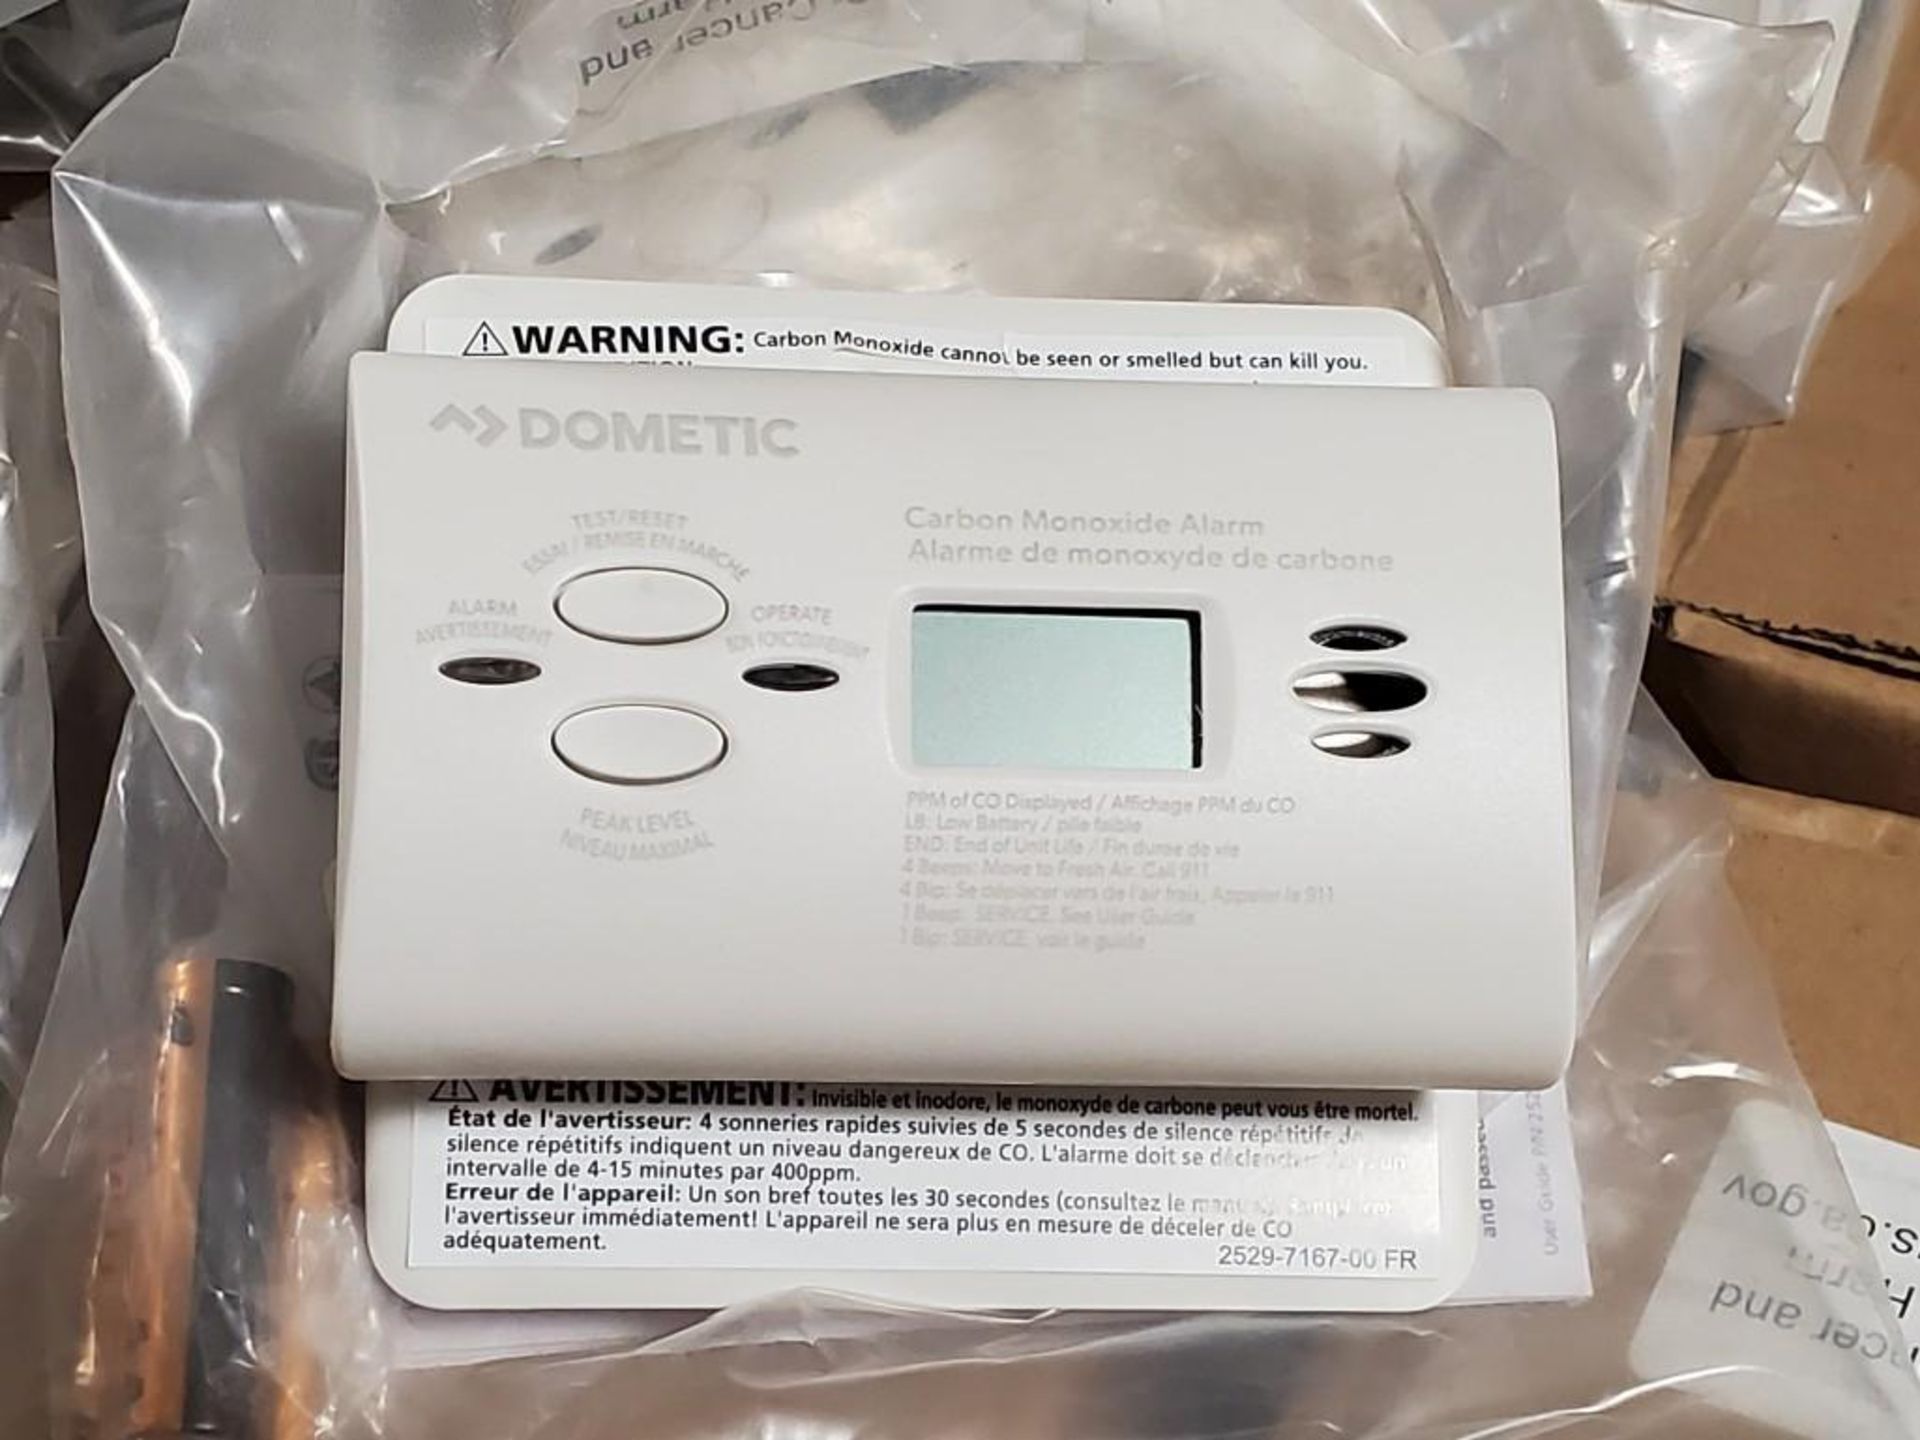 Qty 72 - Dometic Carbon Monoxide detector with LCD. Model CO-900-0140-LPM. New in bulk box.